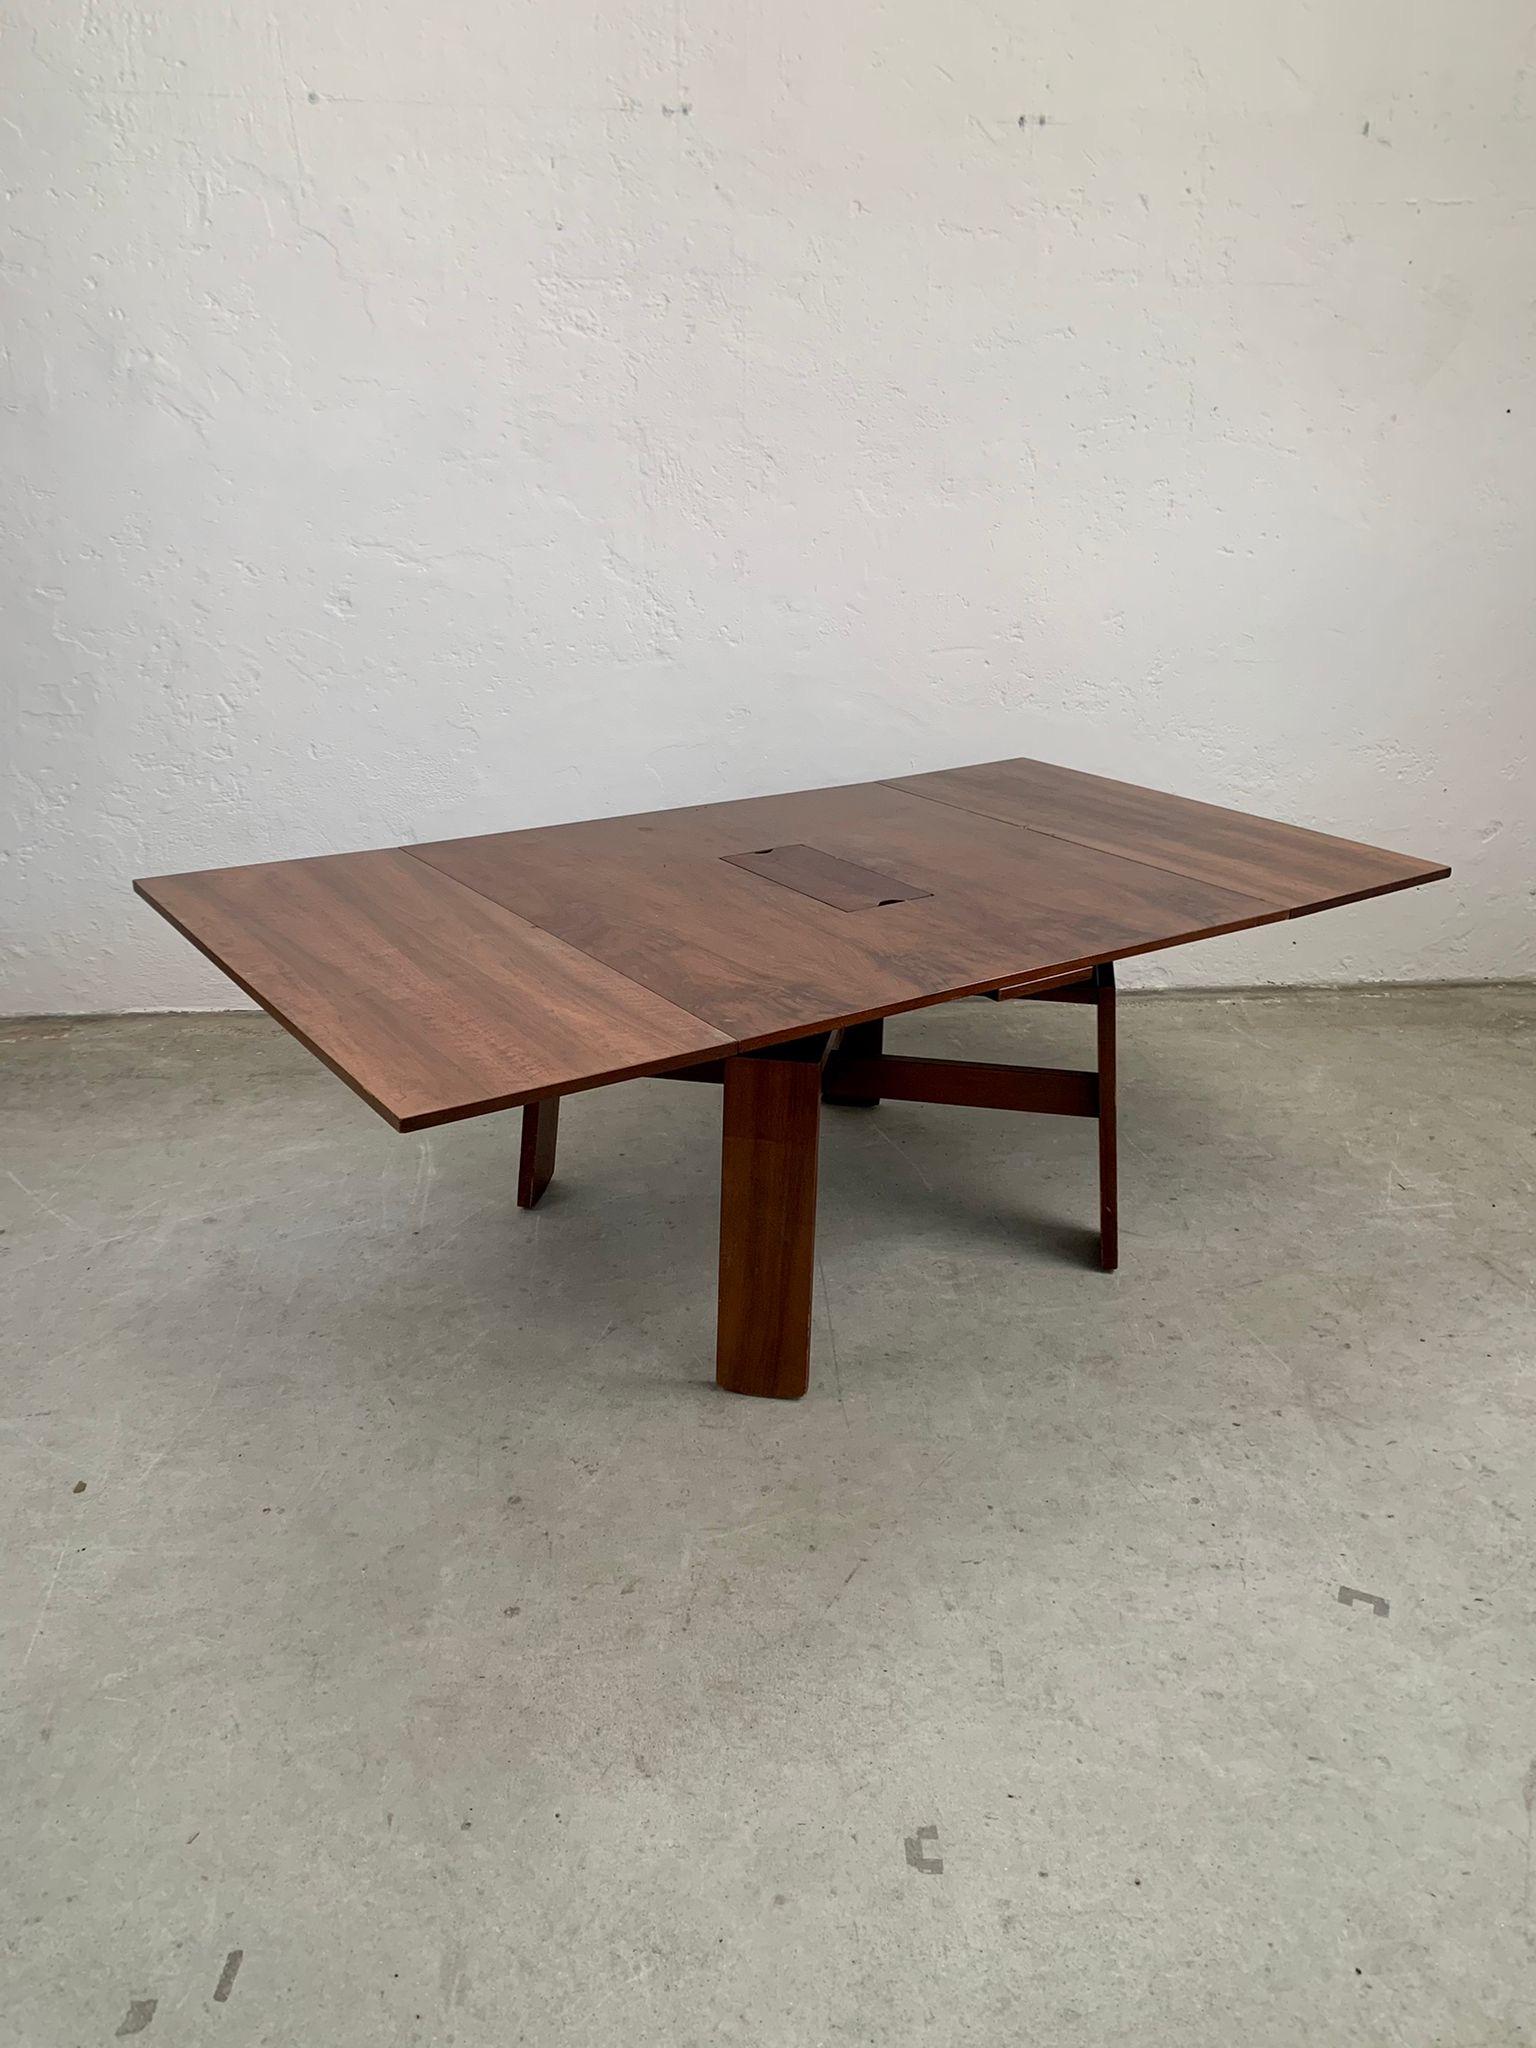 Wooden dining table by Silvio Coppola for Bernini, italy, 1964

Extendable wooden dining table by Silvio Coppola for Bernini.

Dimensions: 115 x 115 x 72 h cm extensions: 210 x 115 x 72 h cm
Good condition, signs of time visible in photo